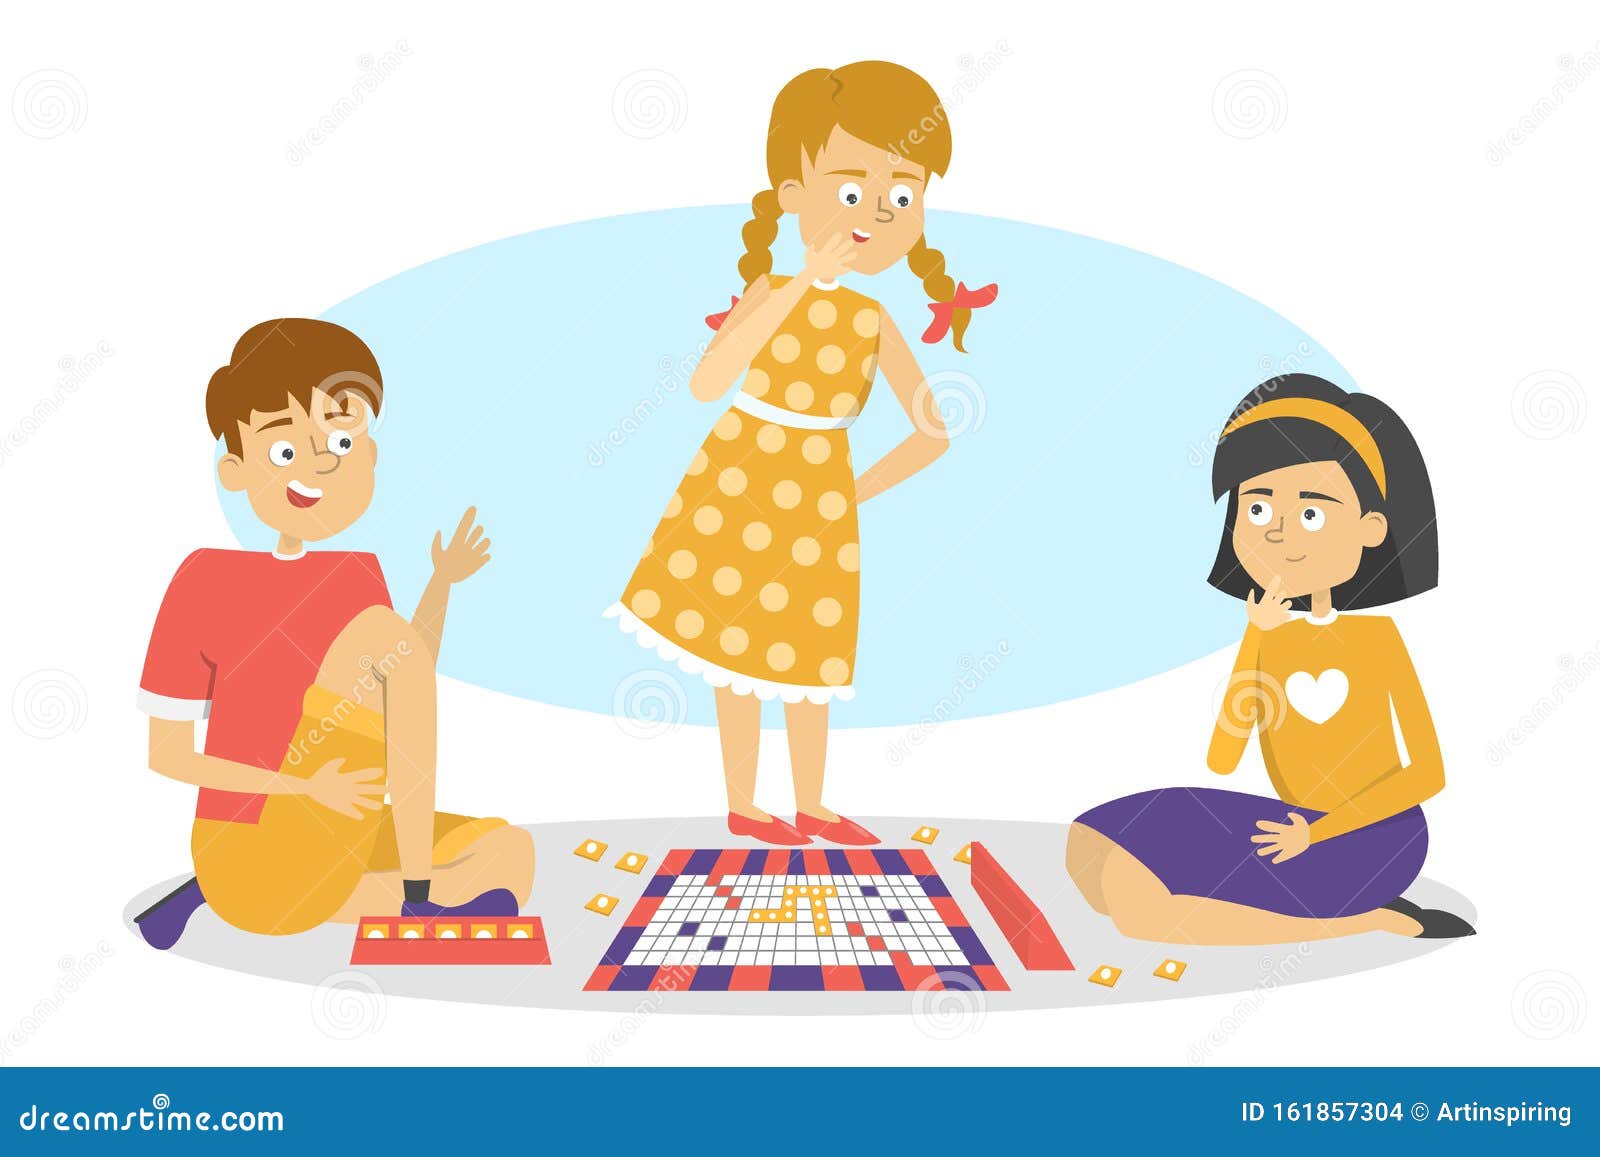 Children Play Board Game Friends Have Fun Stock Vector Illustration